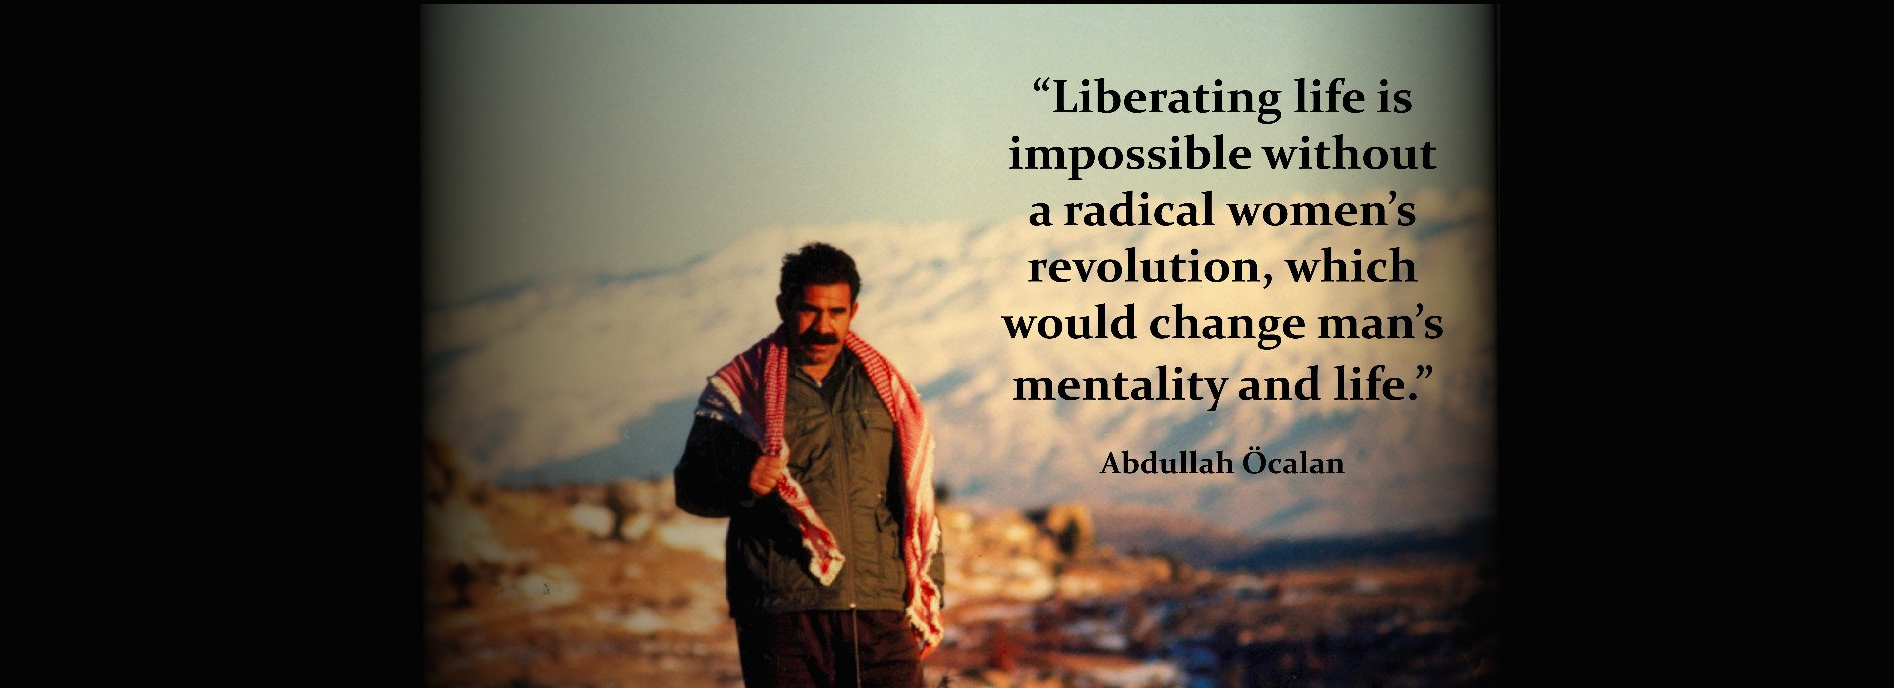 The 4th of April: anniversary of Abdullah Ocalan and of the fight for freedom